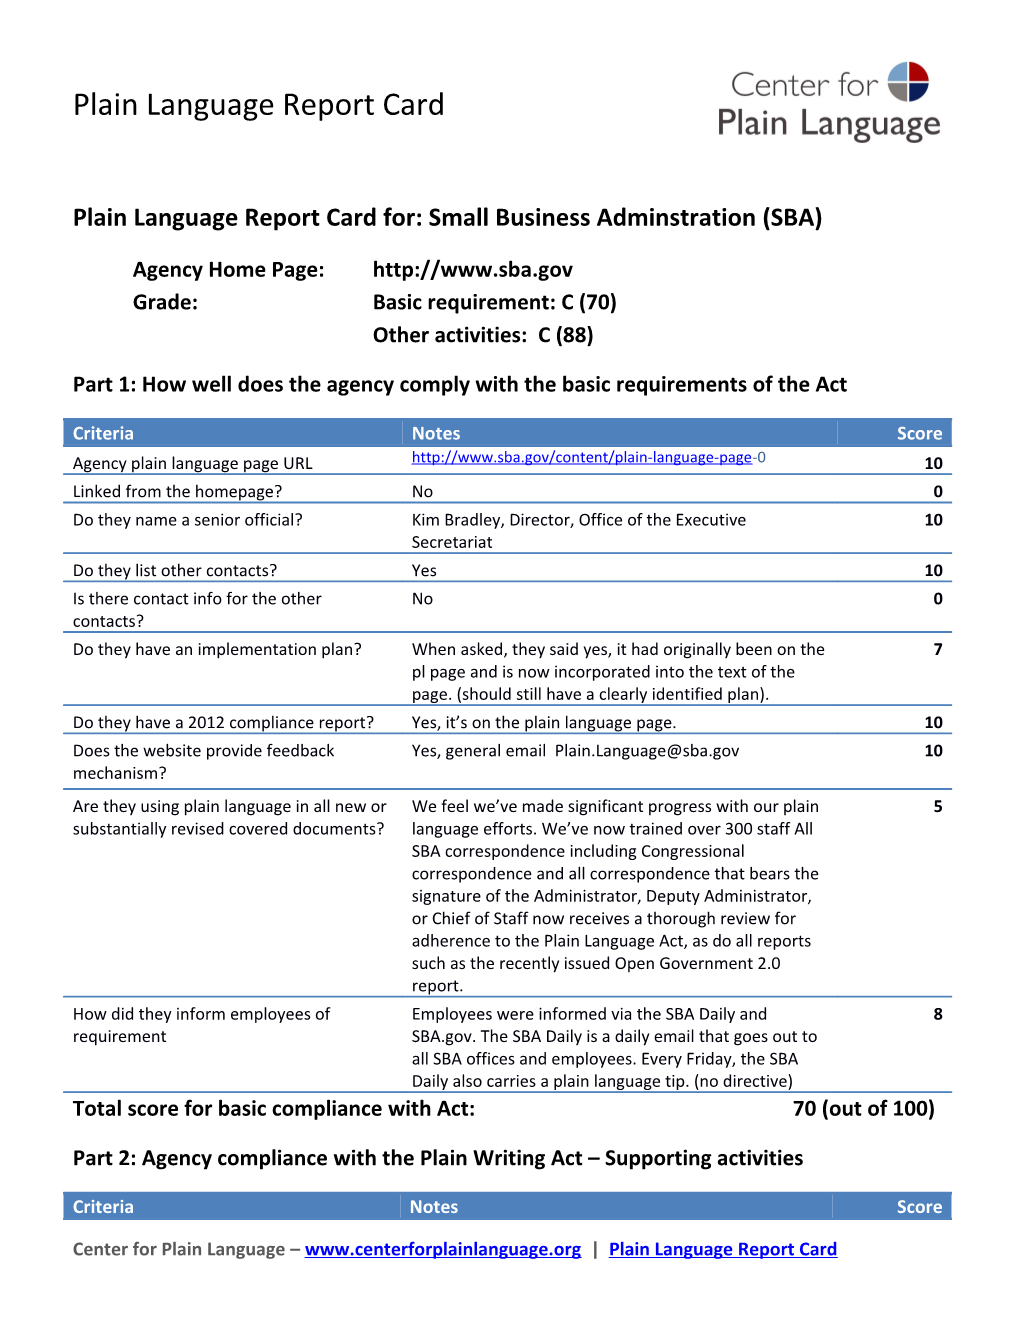 Plain Language Report Card For: Small Business Adminstration (SBA)